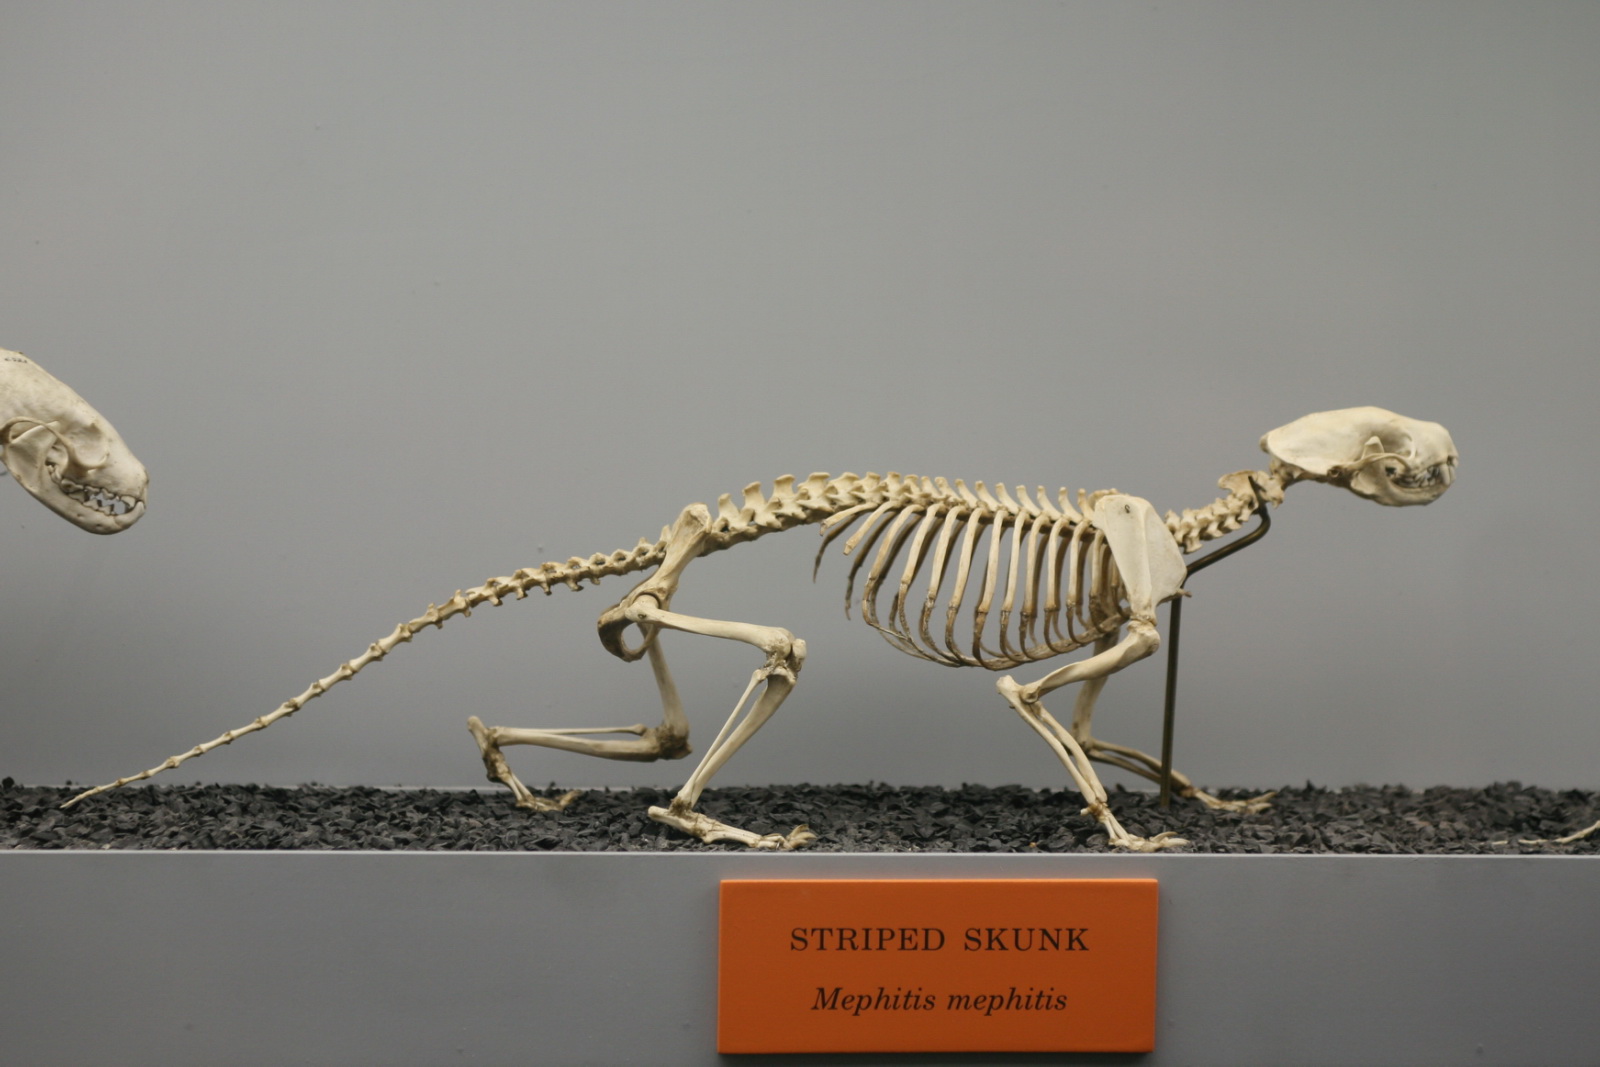 the skeleton of a skeleton is shown in this image